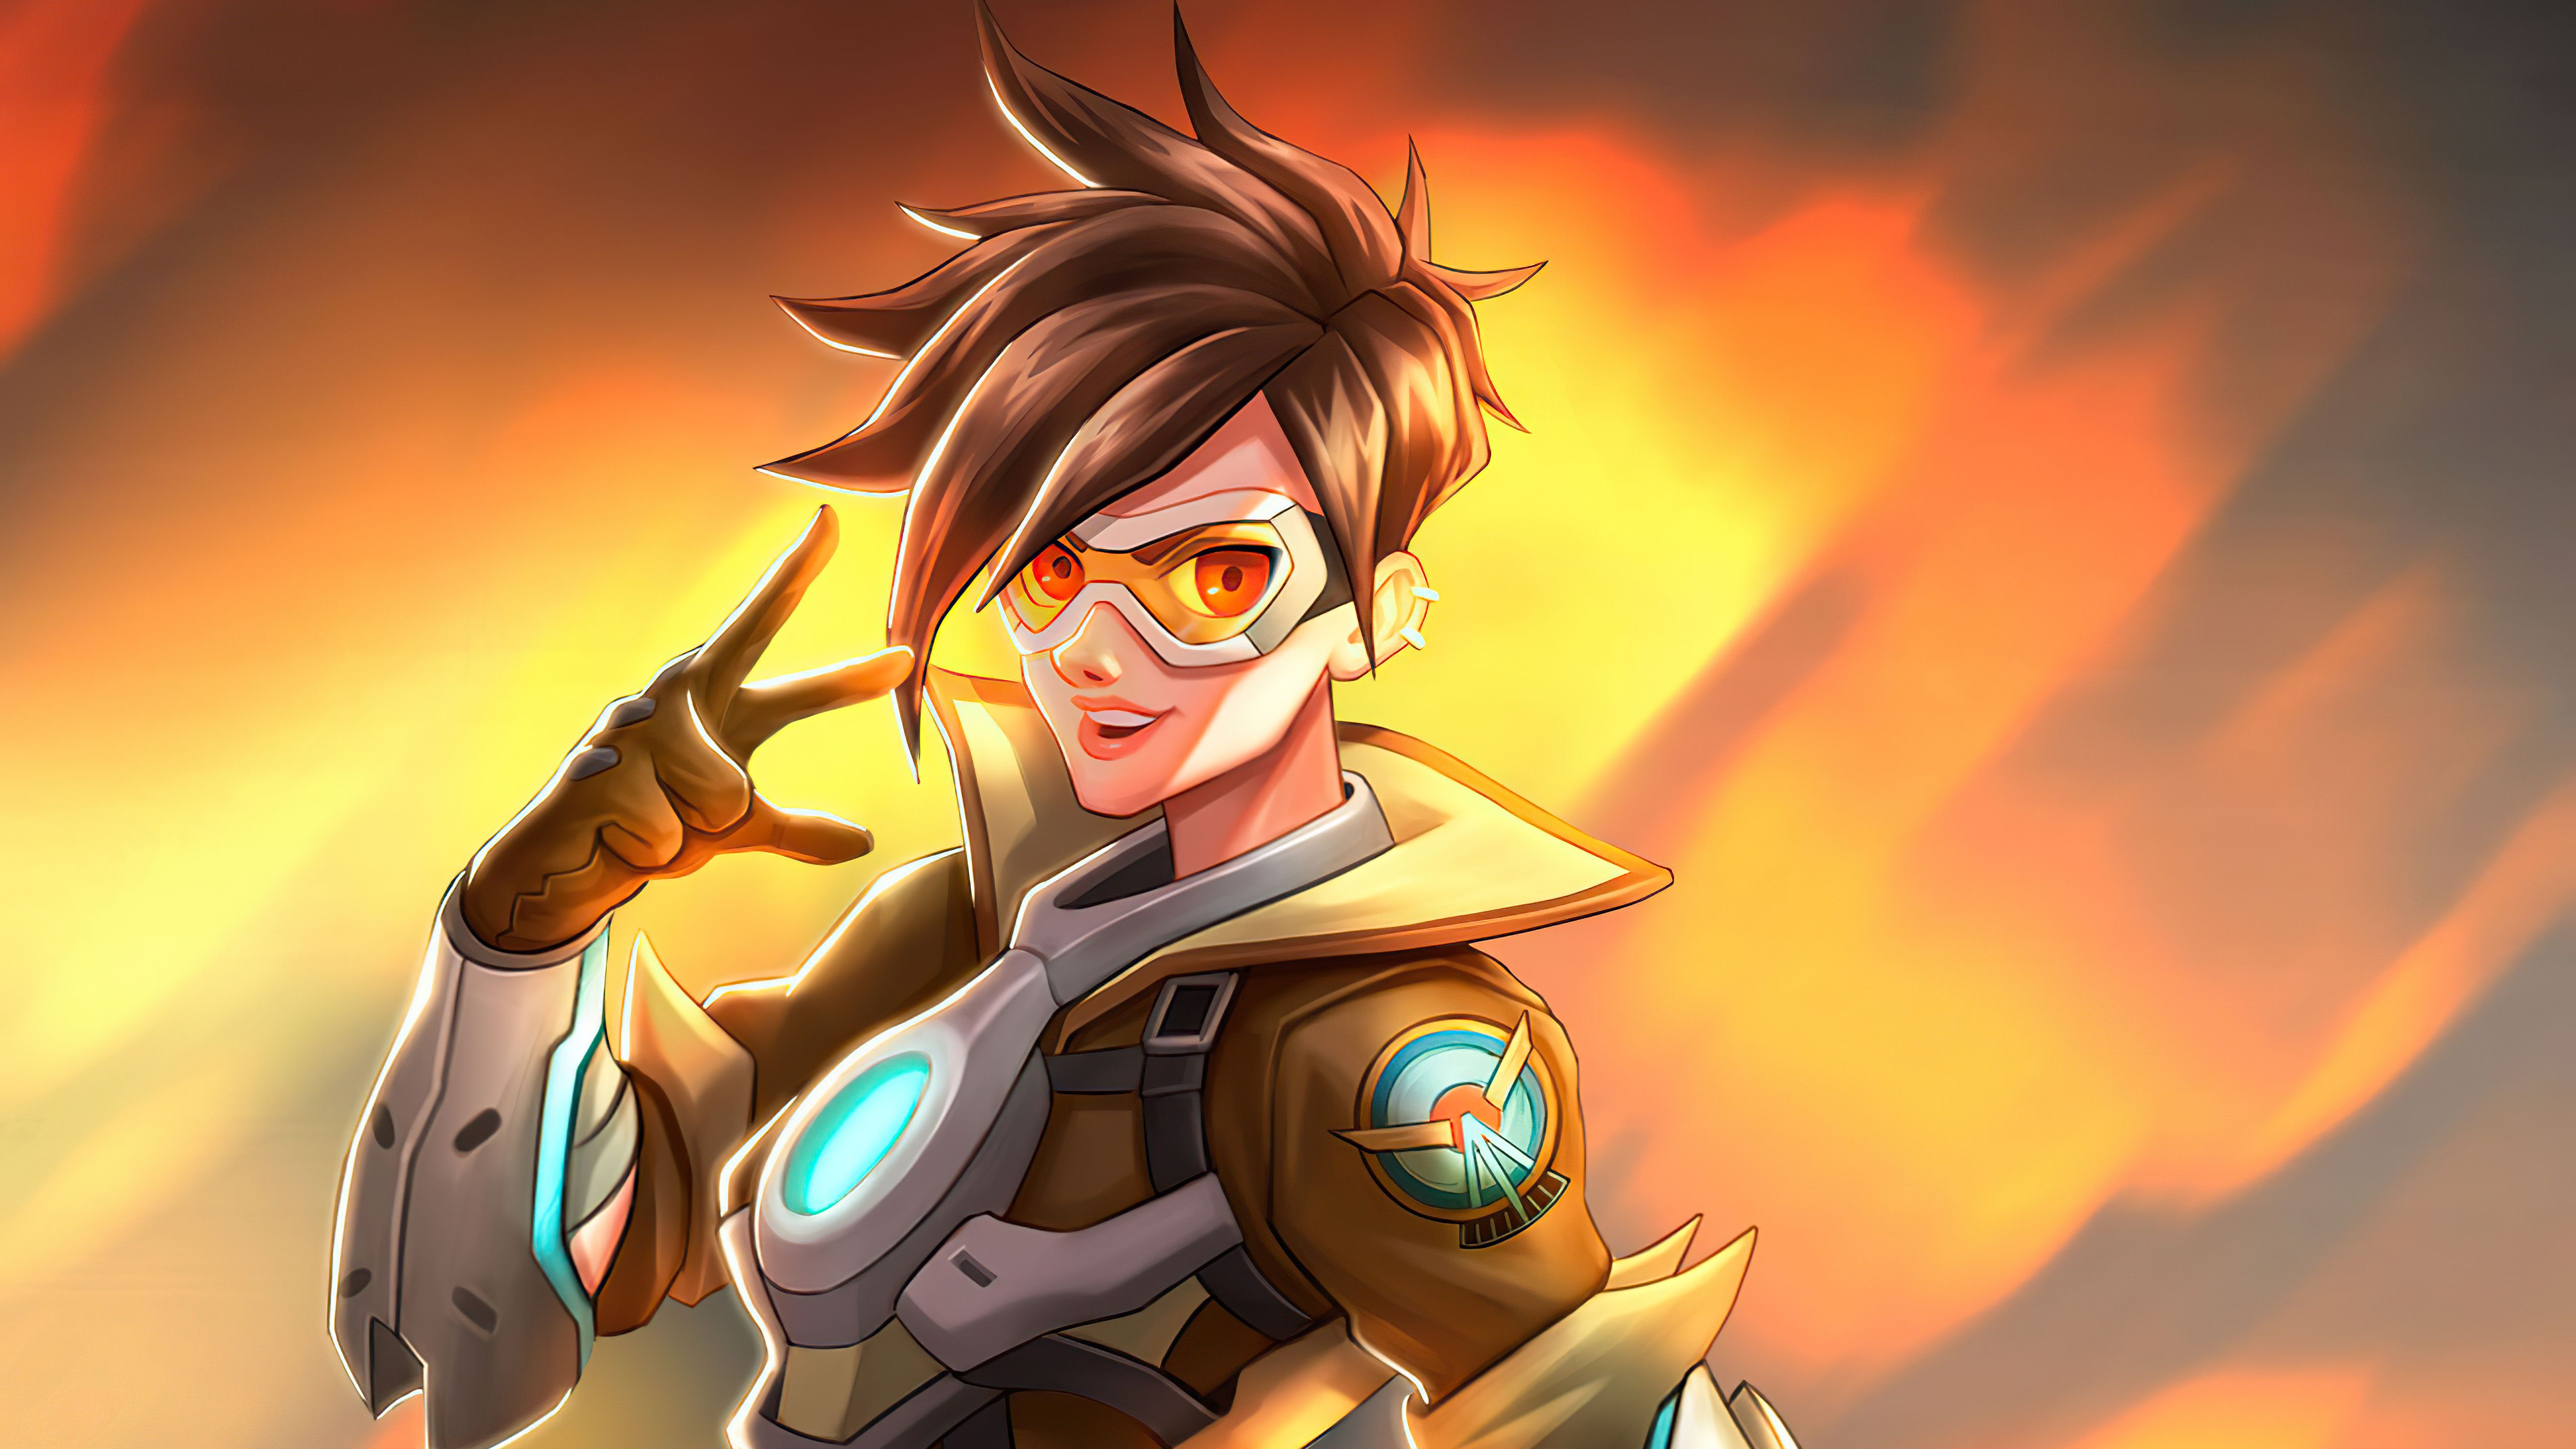 Wallpaper 4k Tracer From Overwatch 4k Tracer From Overwatch 4k wallpaper